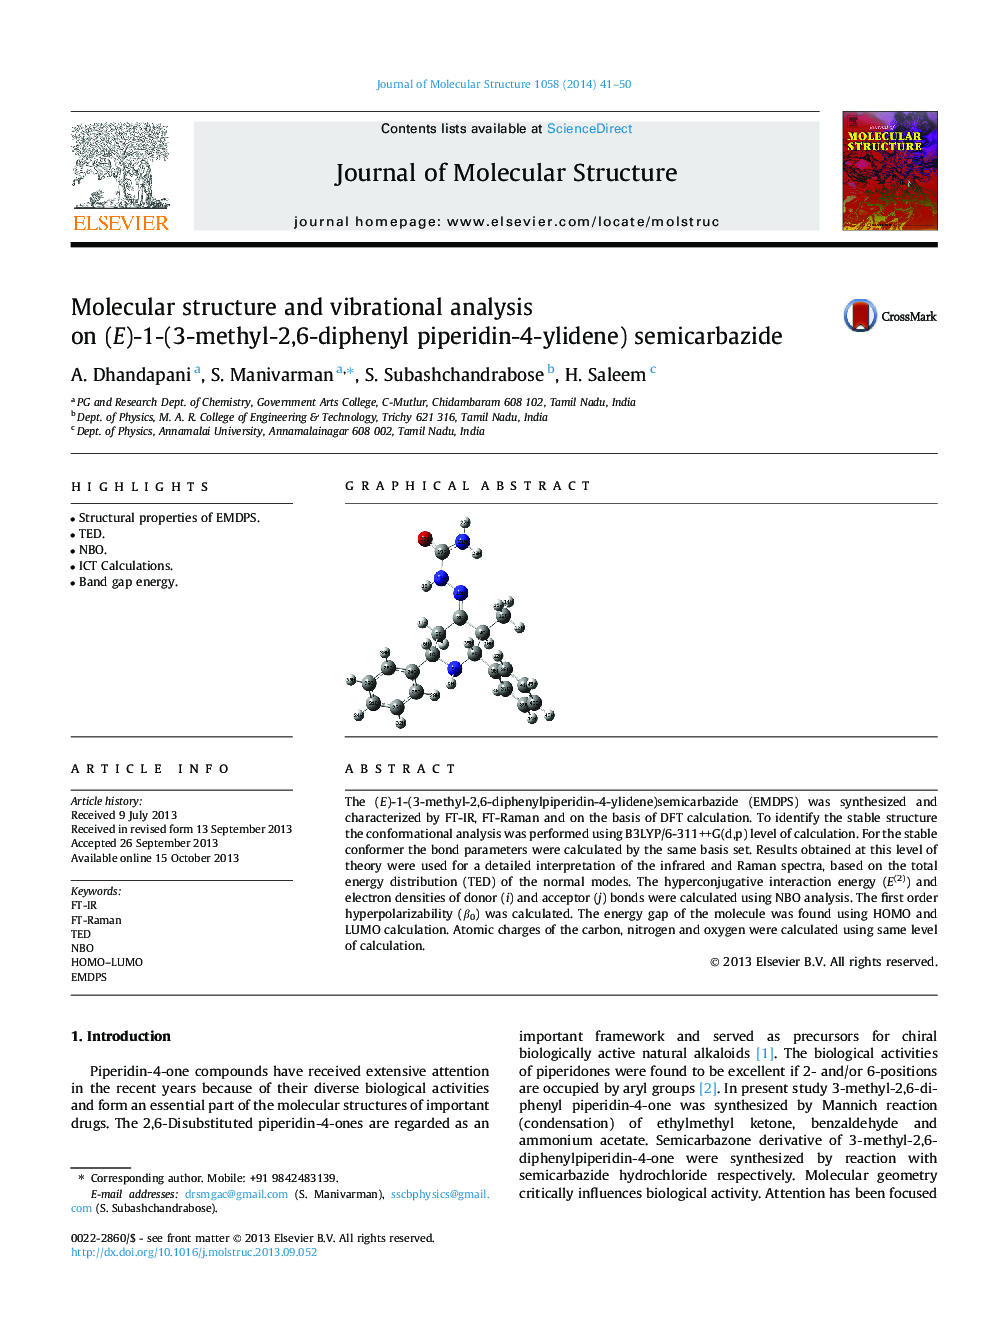 Molecular structure and vibrational analysis on (E)-1-(3-methyl-2,6-diphenyl piperidin-4-ylidene) semicarbazide